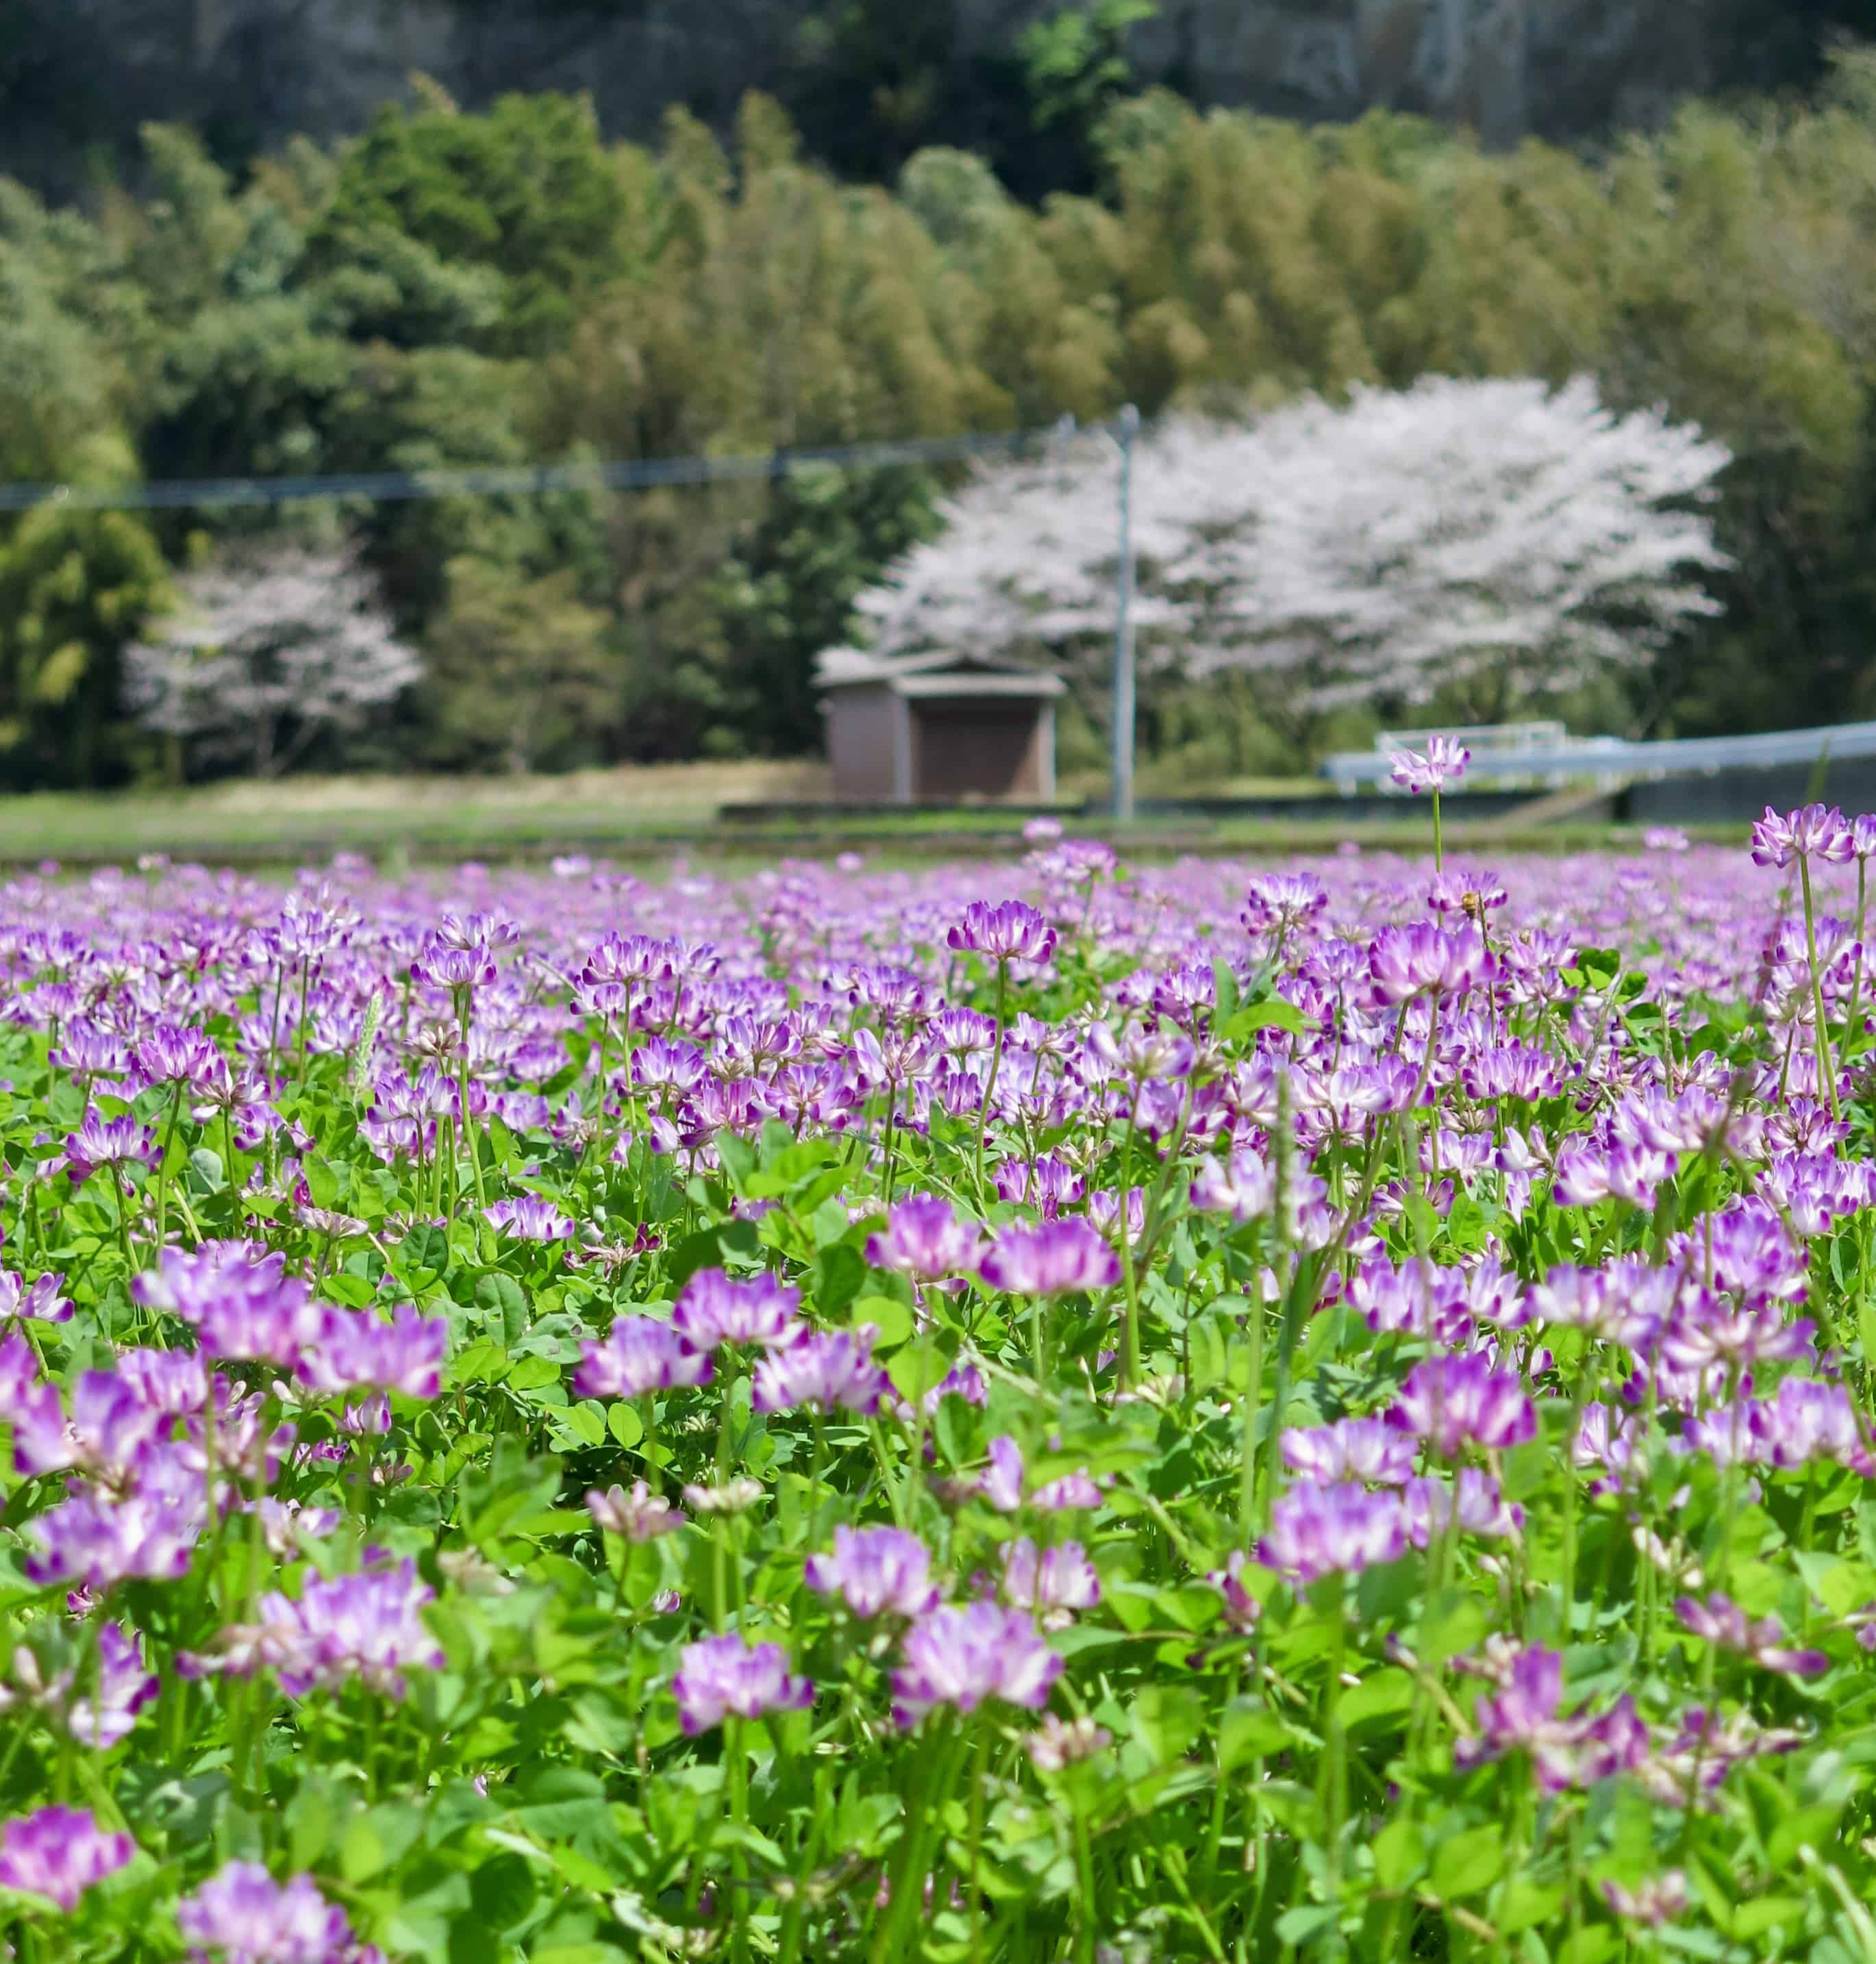 Purple Chinese milk vetch covers a rice field, and cherry blossoms bloom in the background.